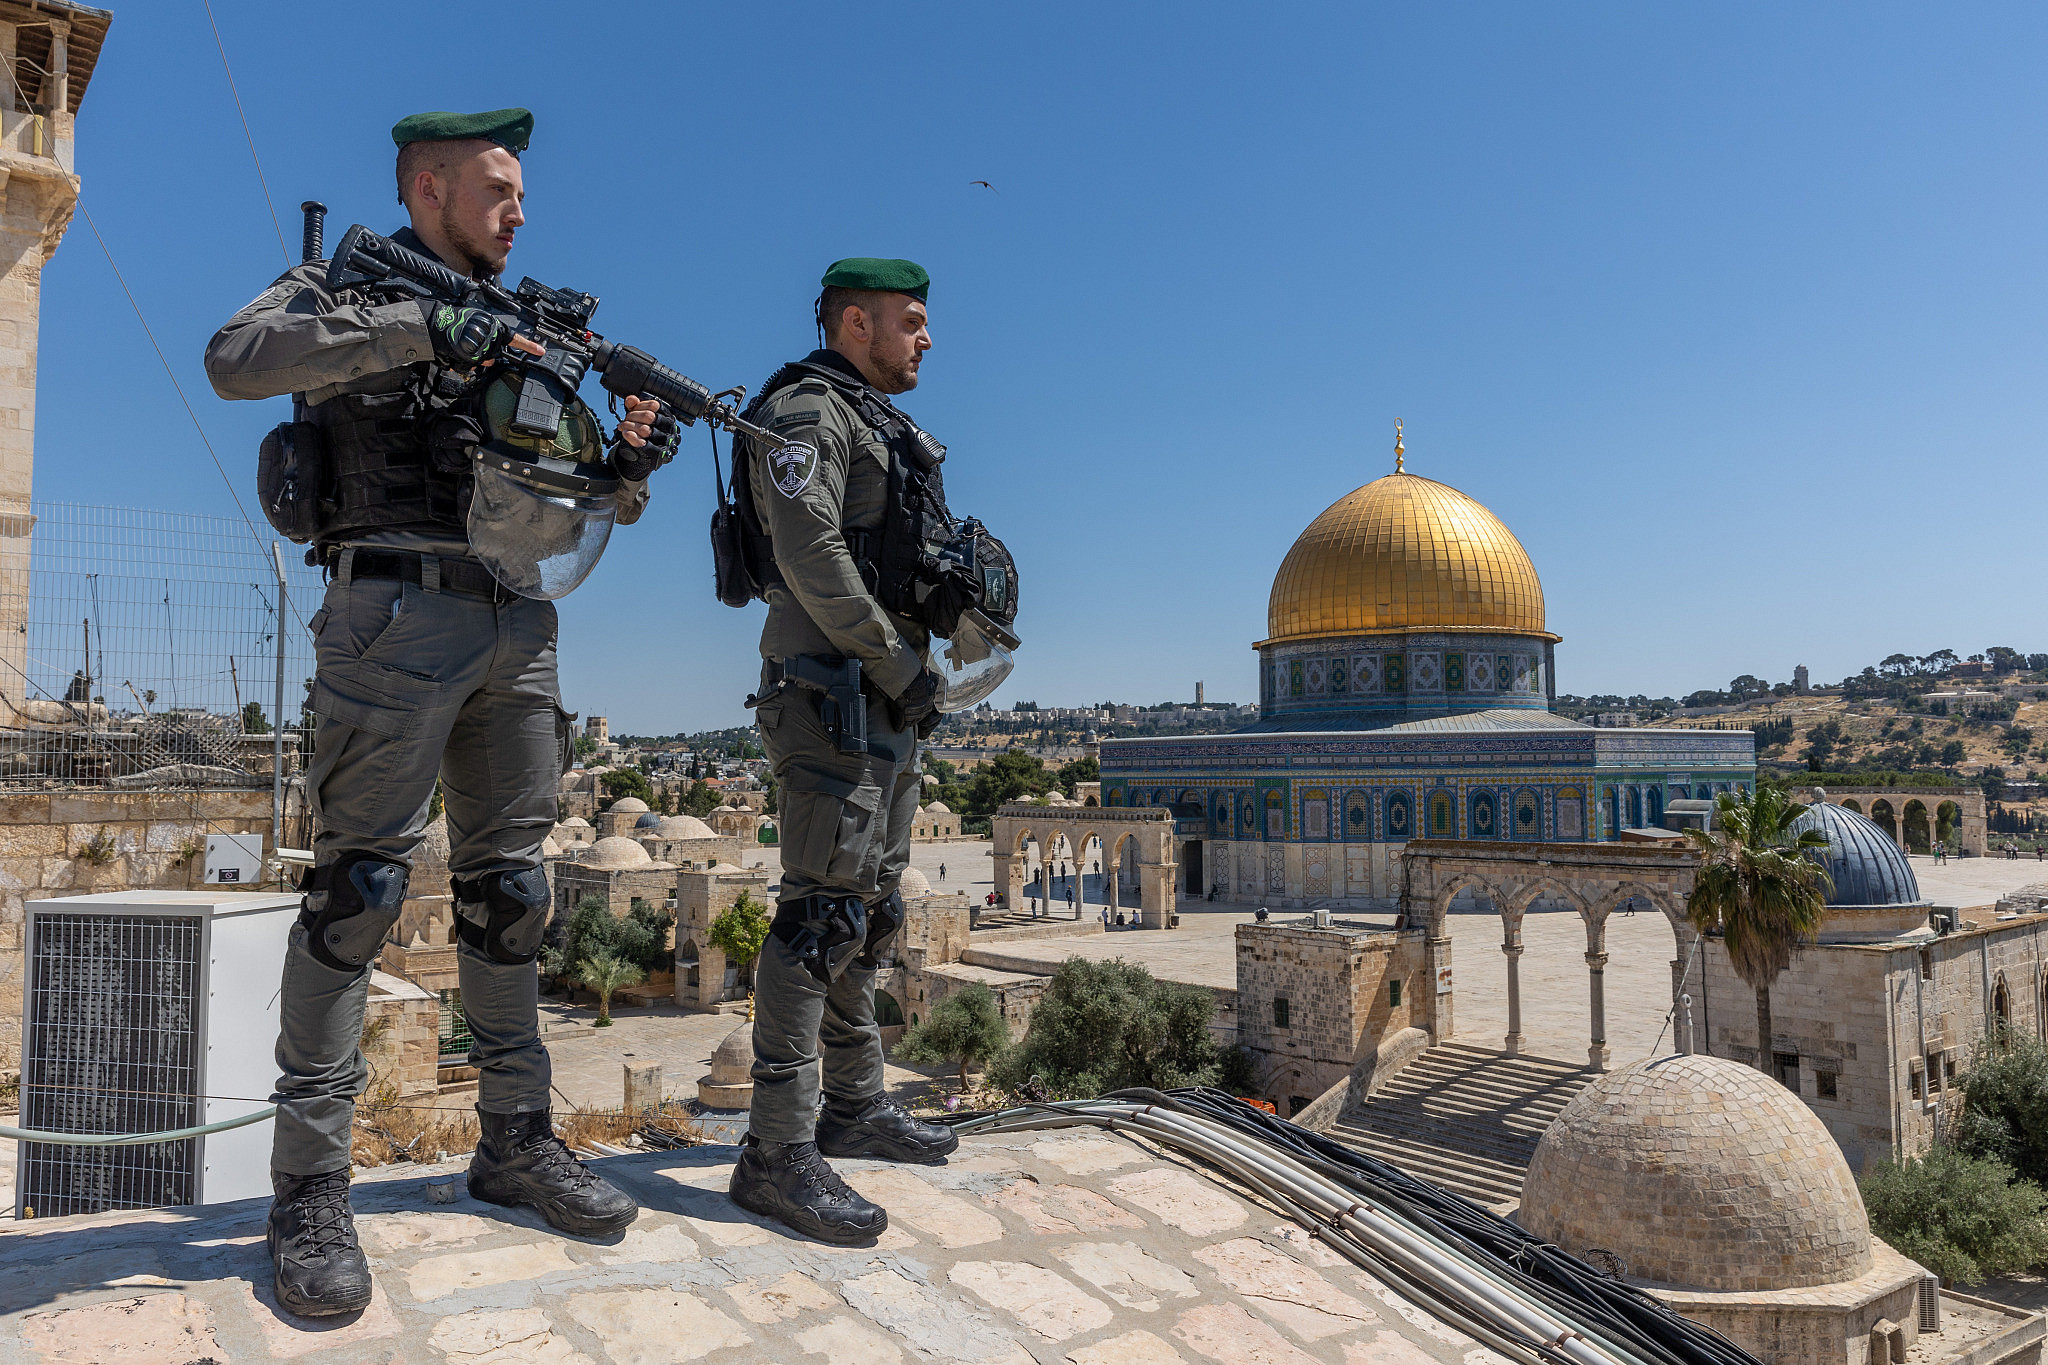 Israeli border police officers stand guard near the Al-Aqsa Mosque compound in Jerusalem Old City, May 25, 2022. (Yossi Aloni/Flash90)